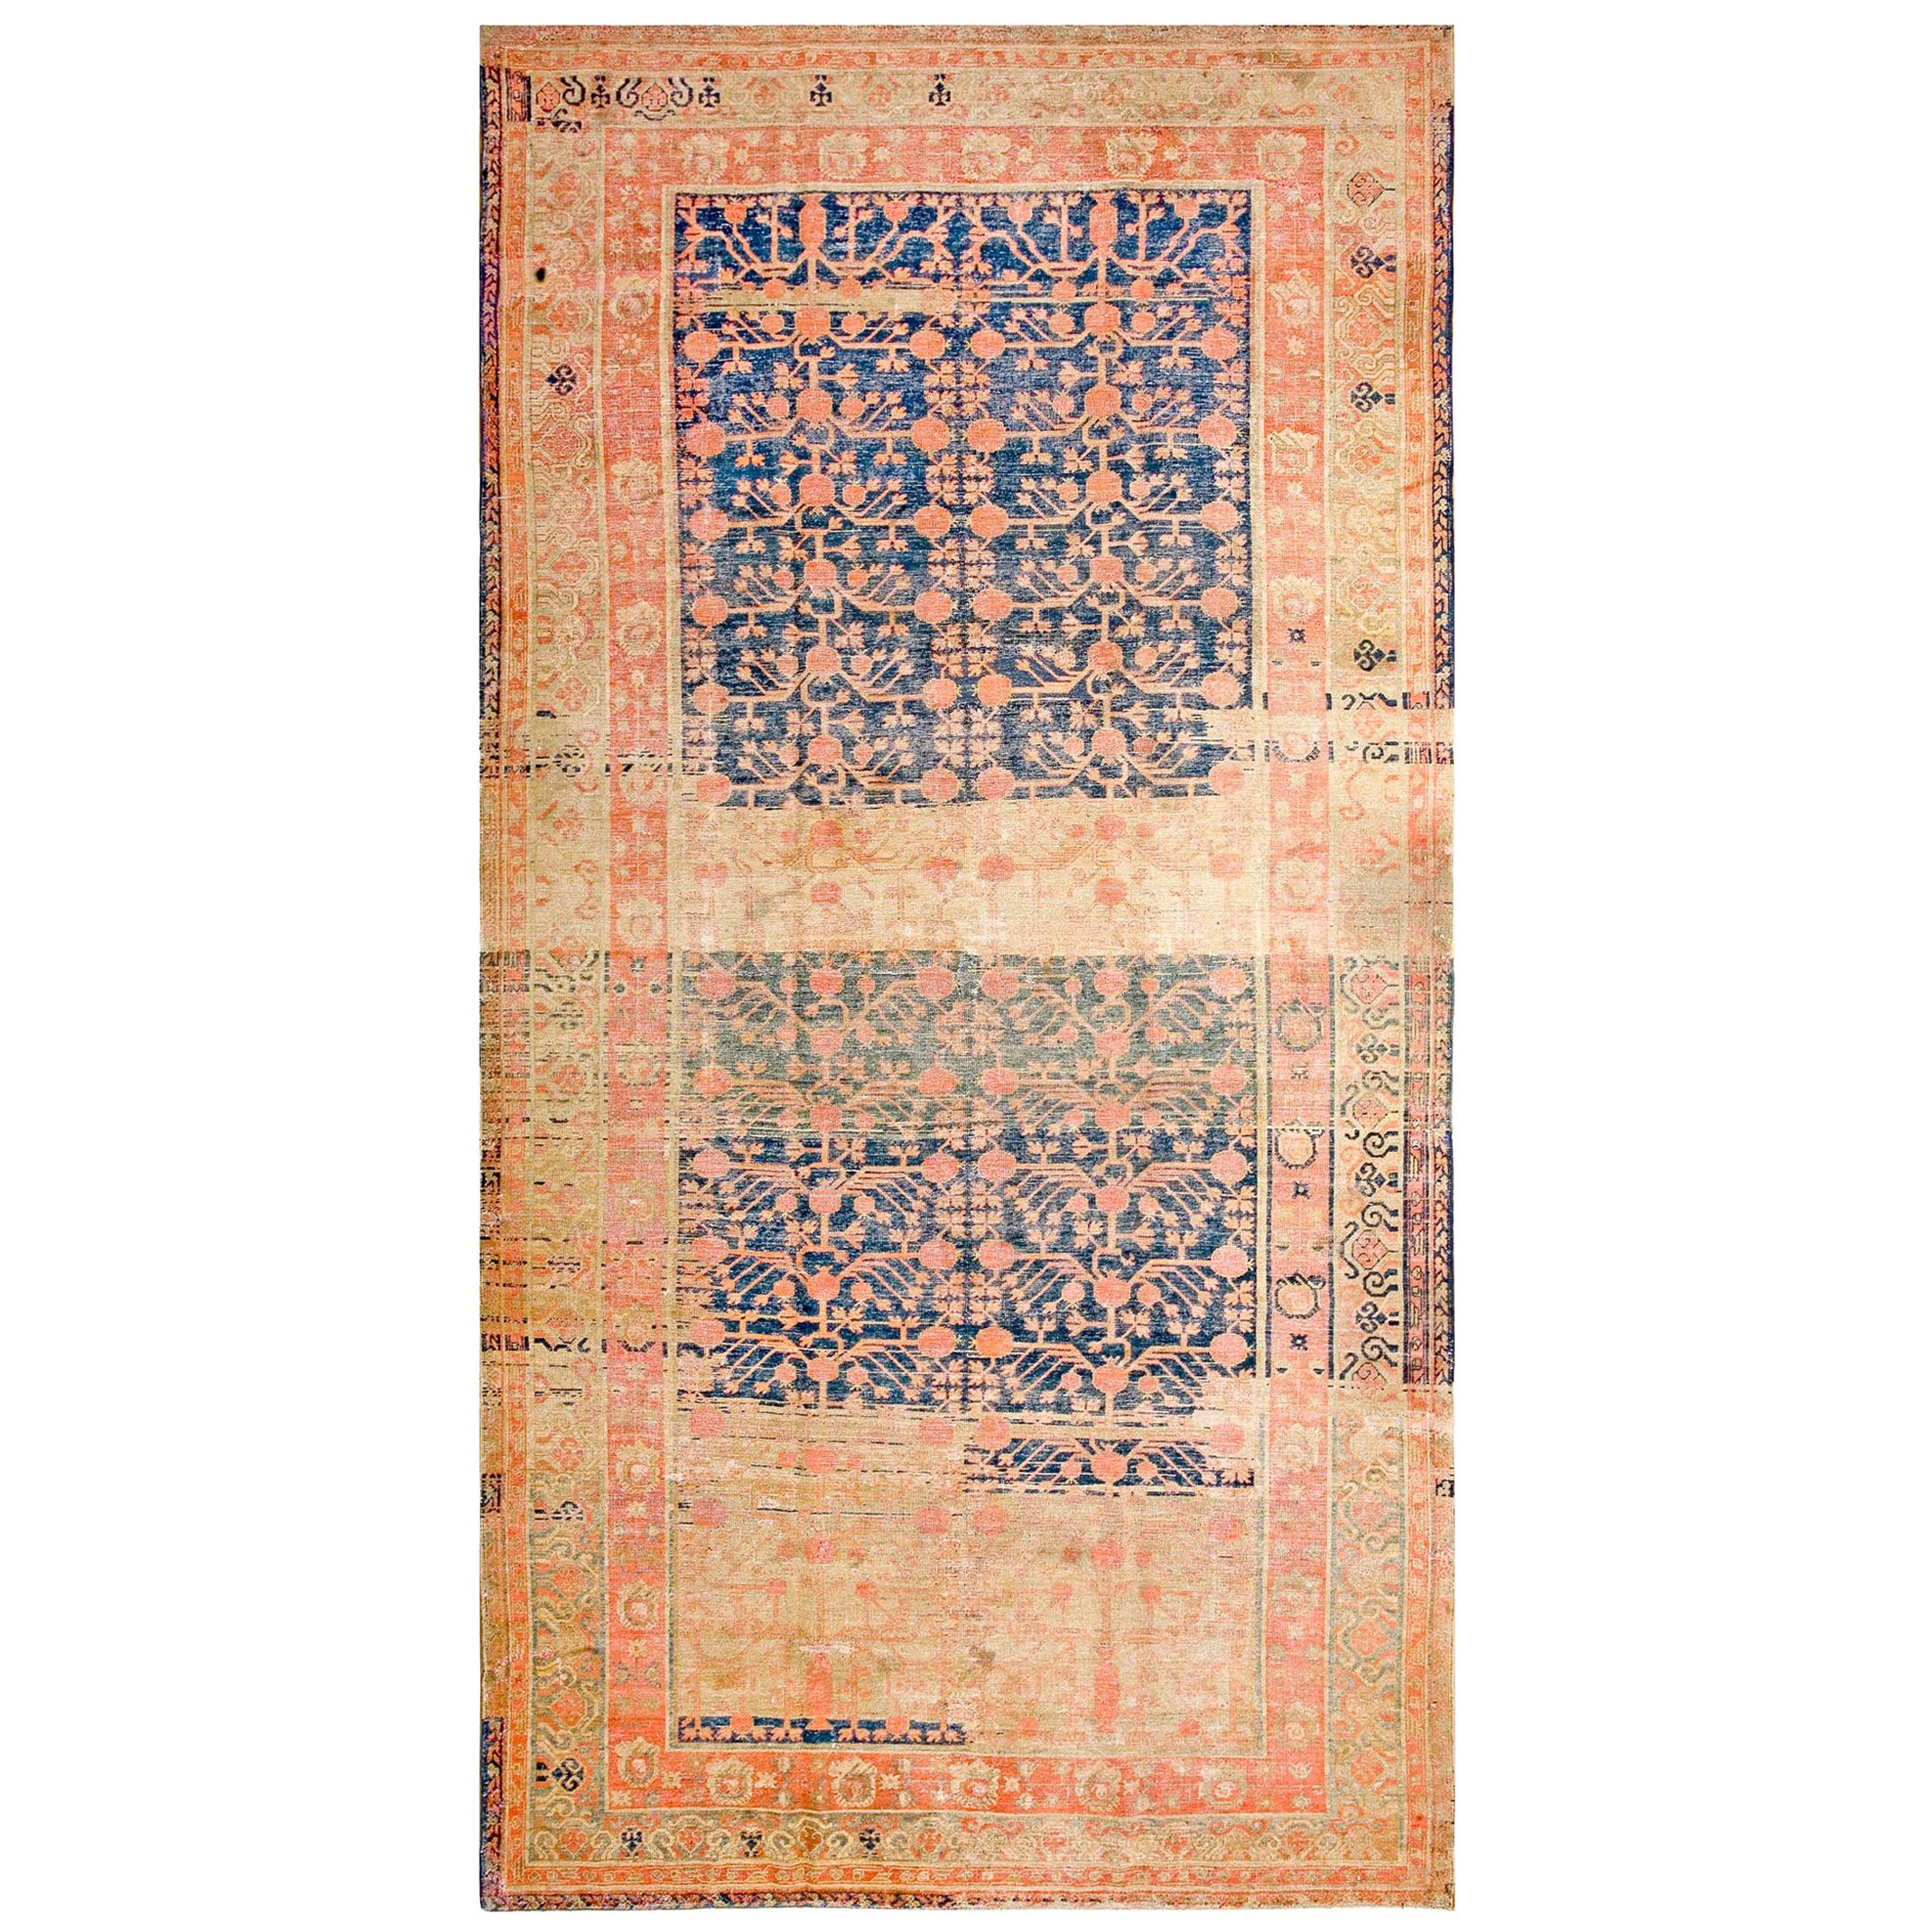 Early 20th Century Central Asian Khotan Carpet ( 7'4" x 14'4" - 223 x 437 ) For Sale